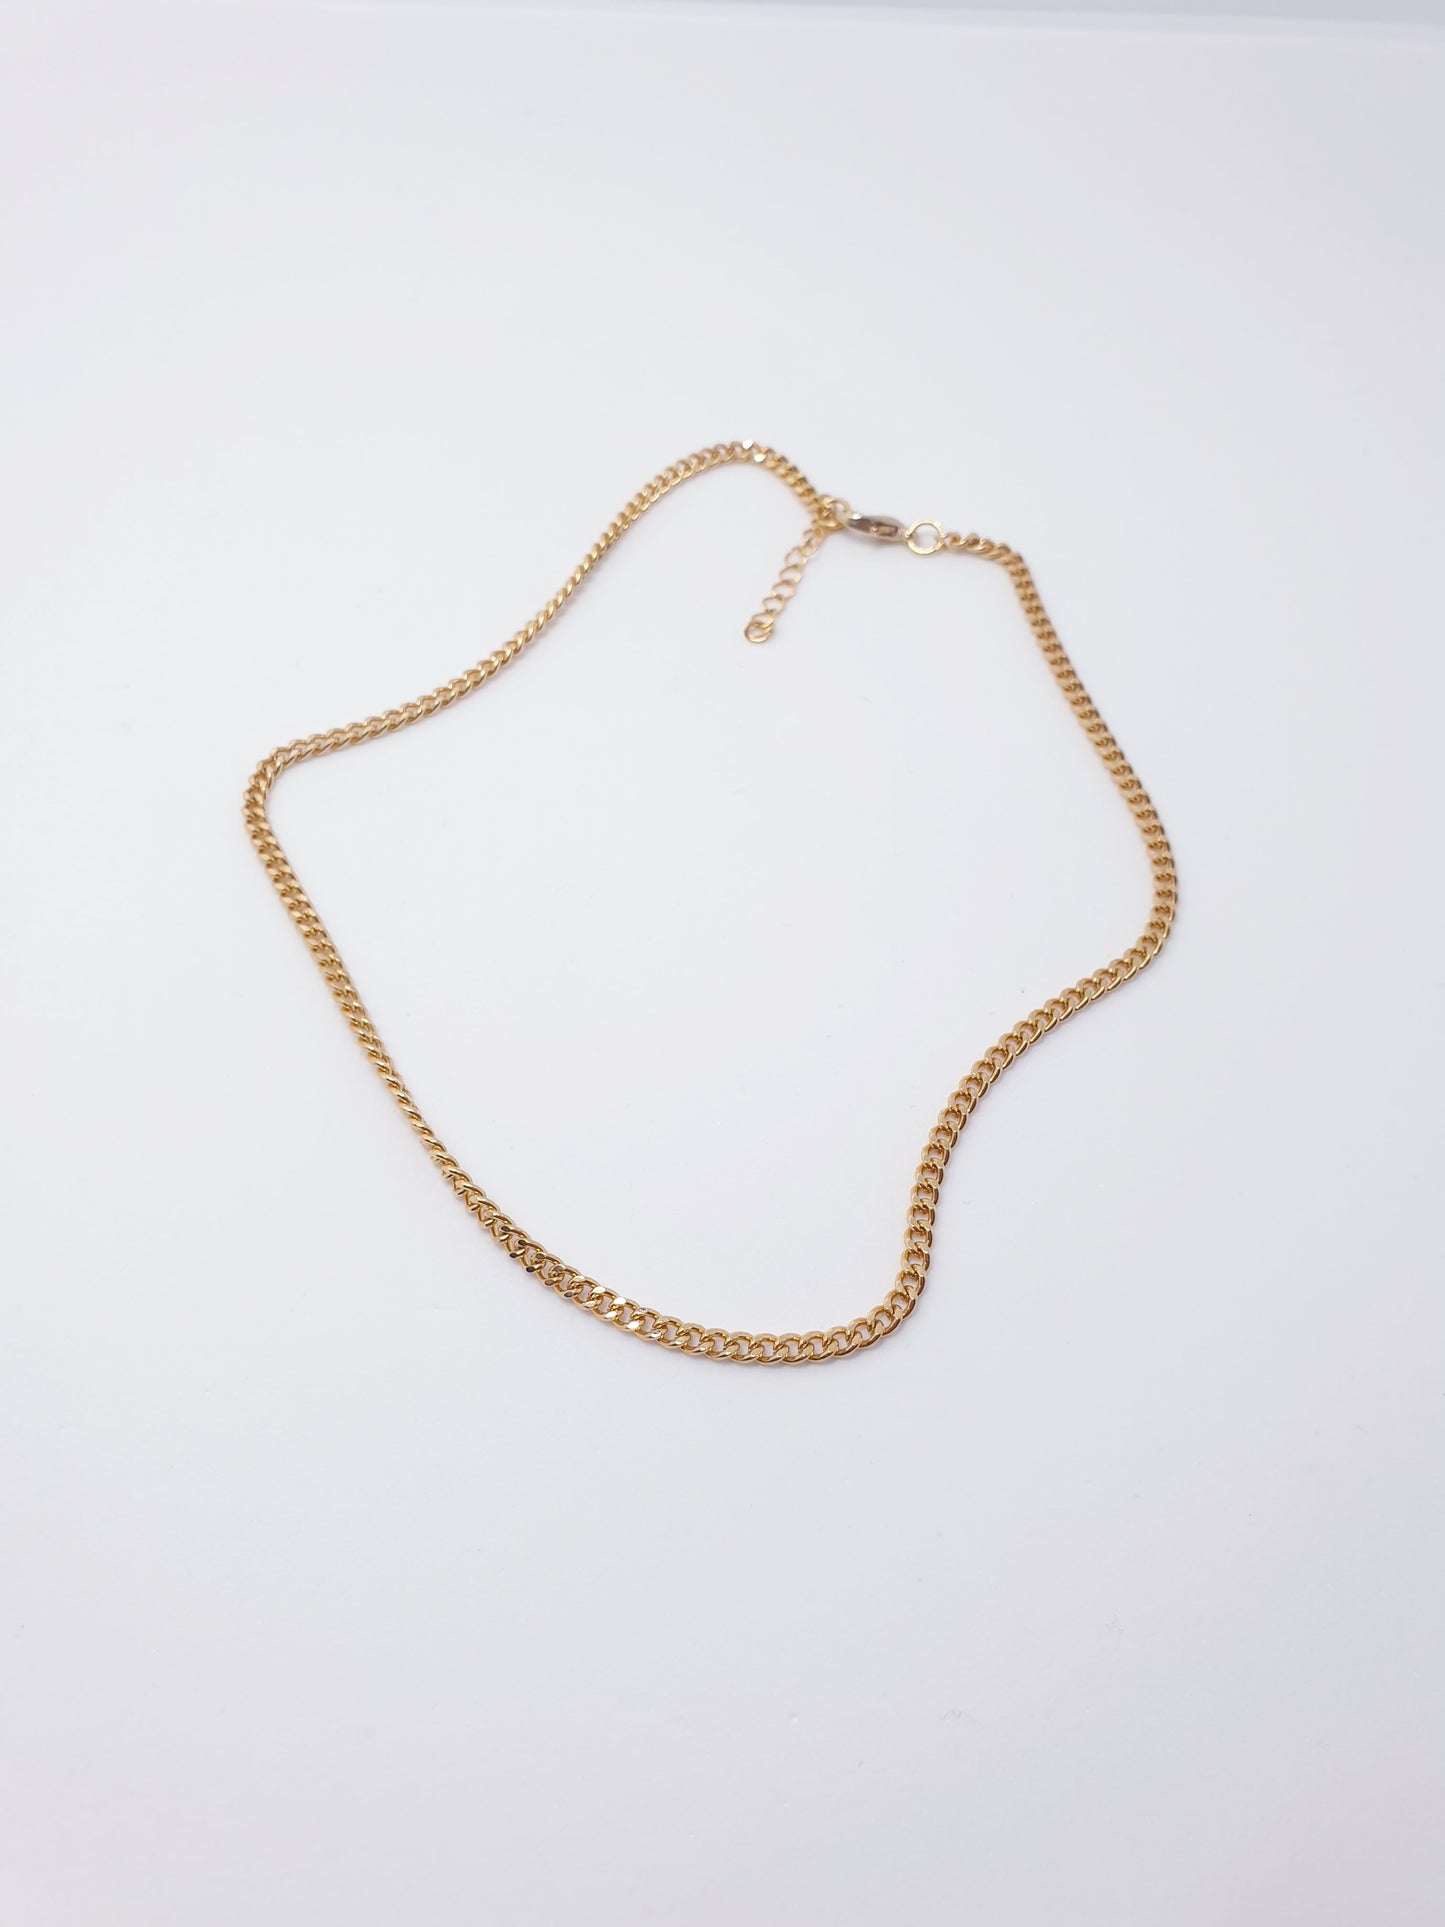 Gold Curb Chain Adjustable